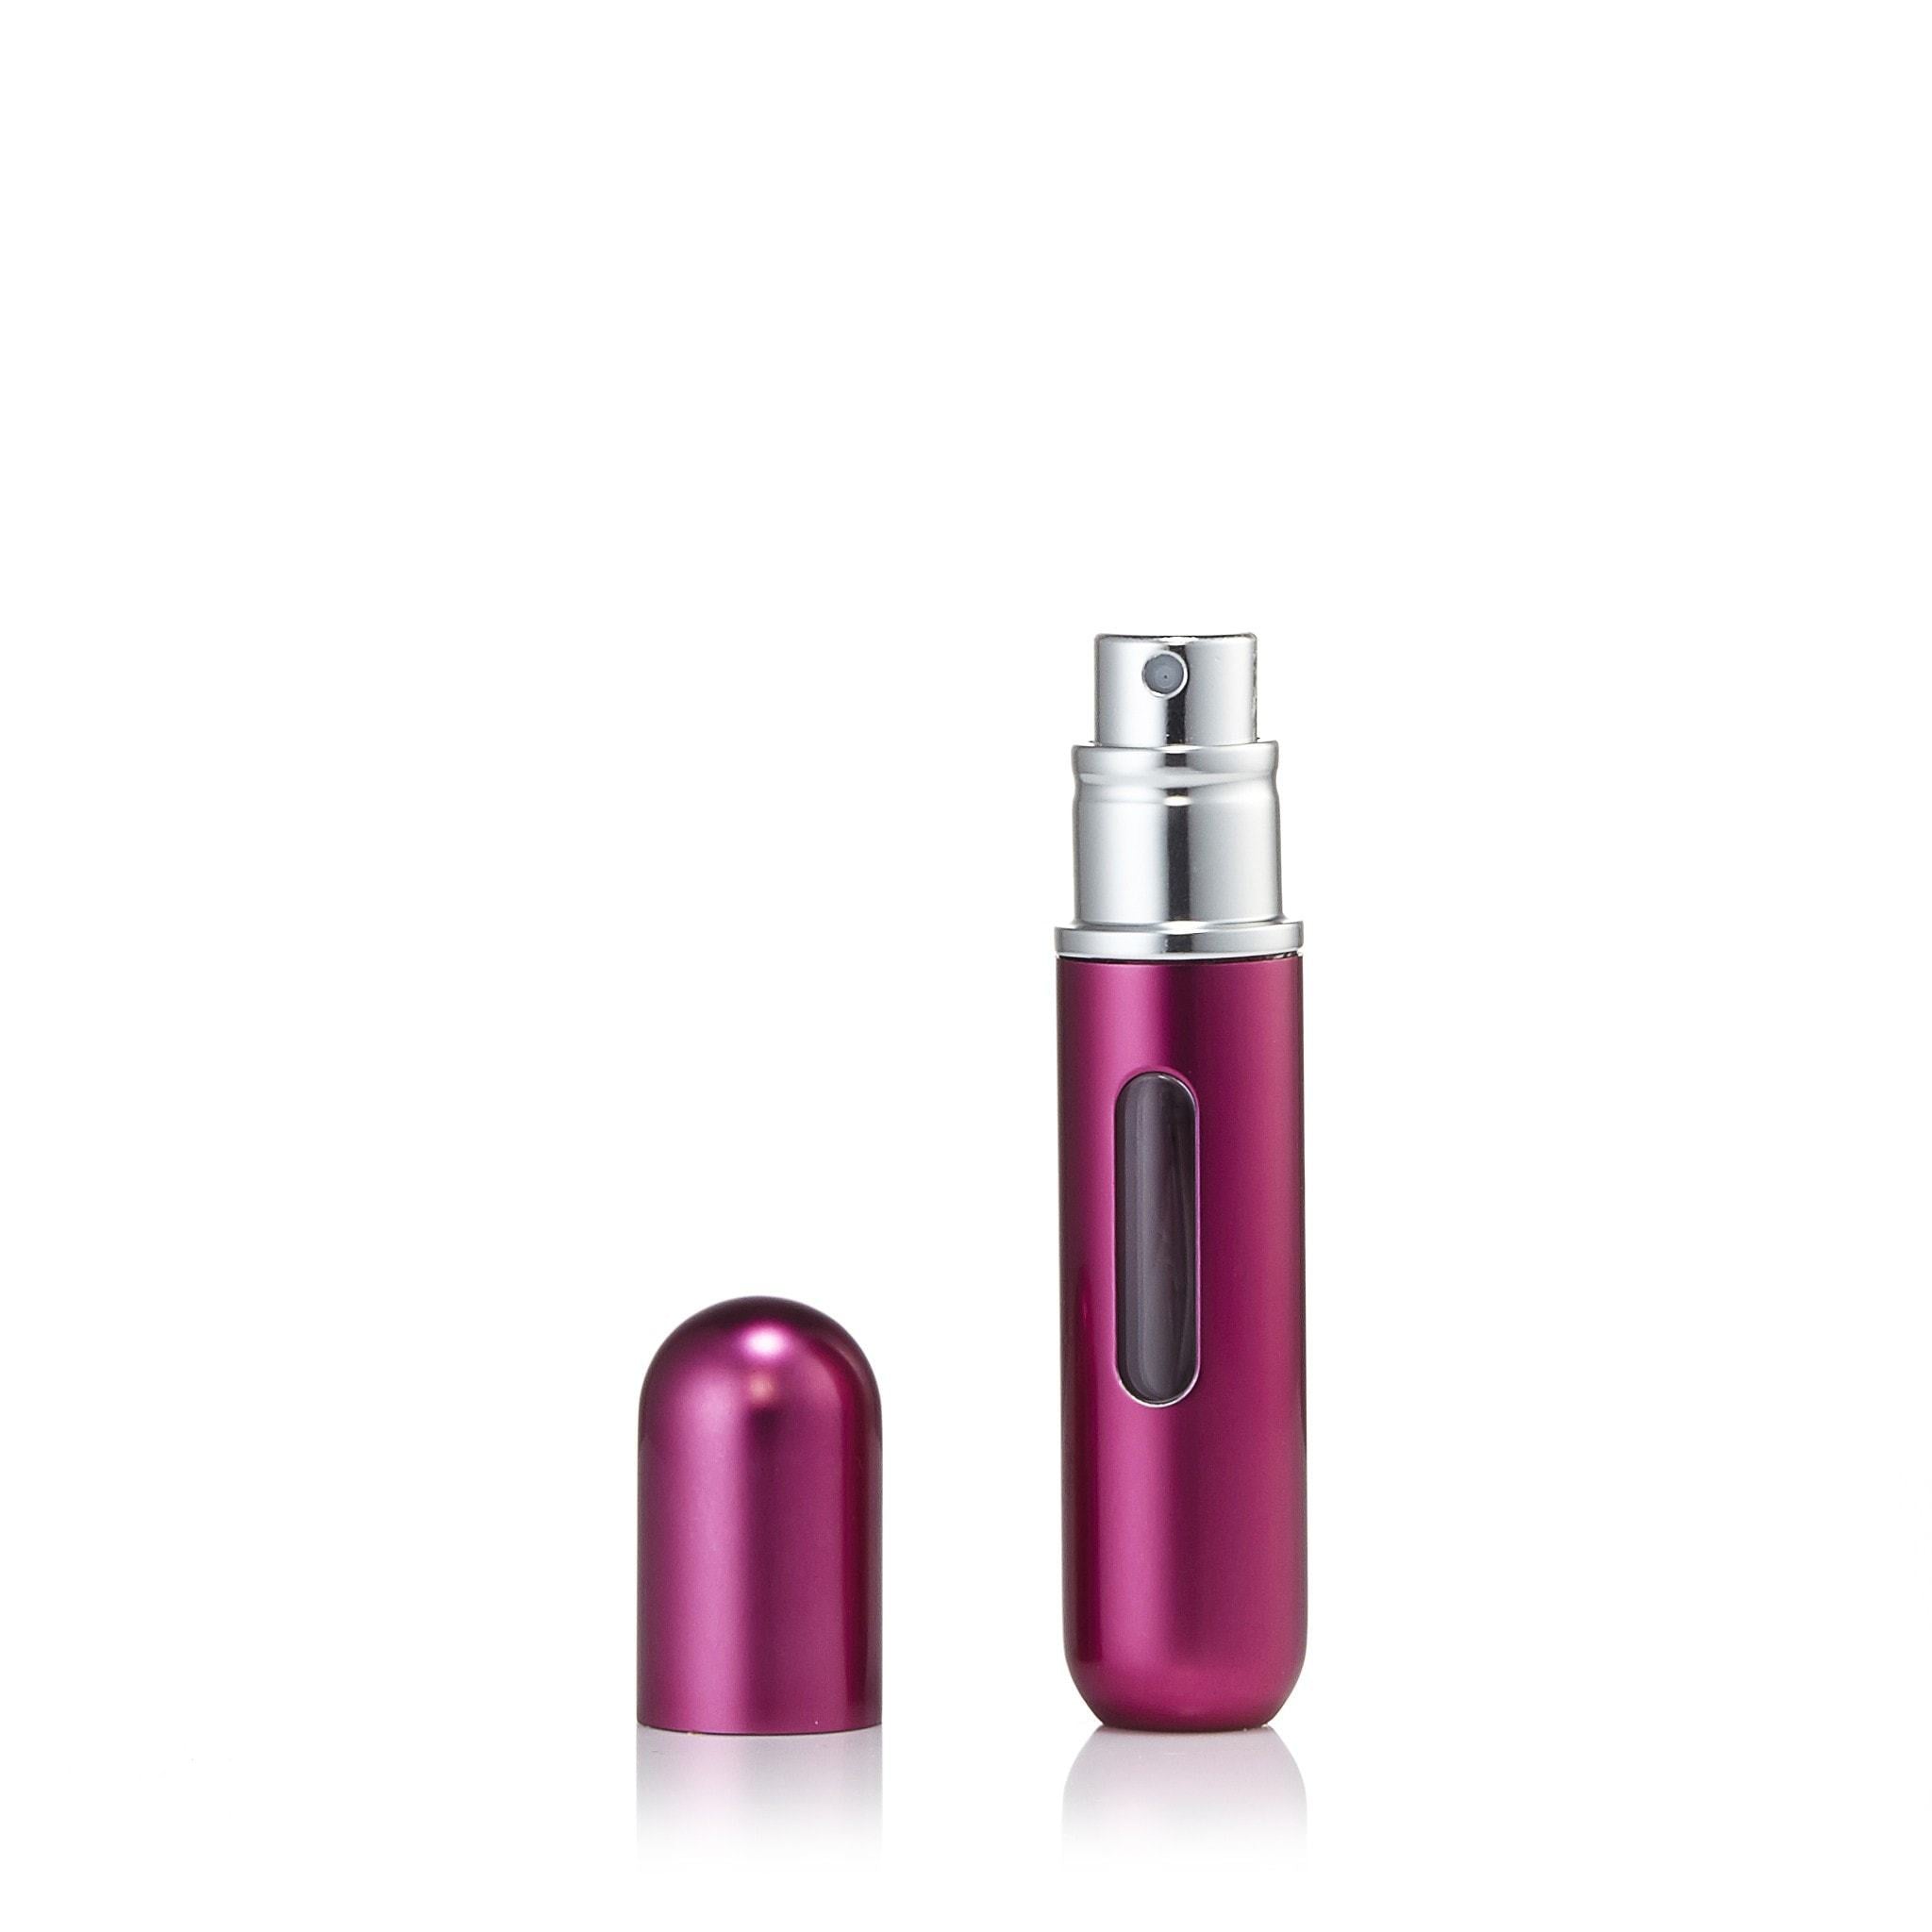 Pump and Fill Fragrance Atomizer by Flo – Perfumania